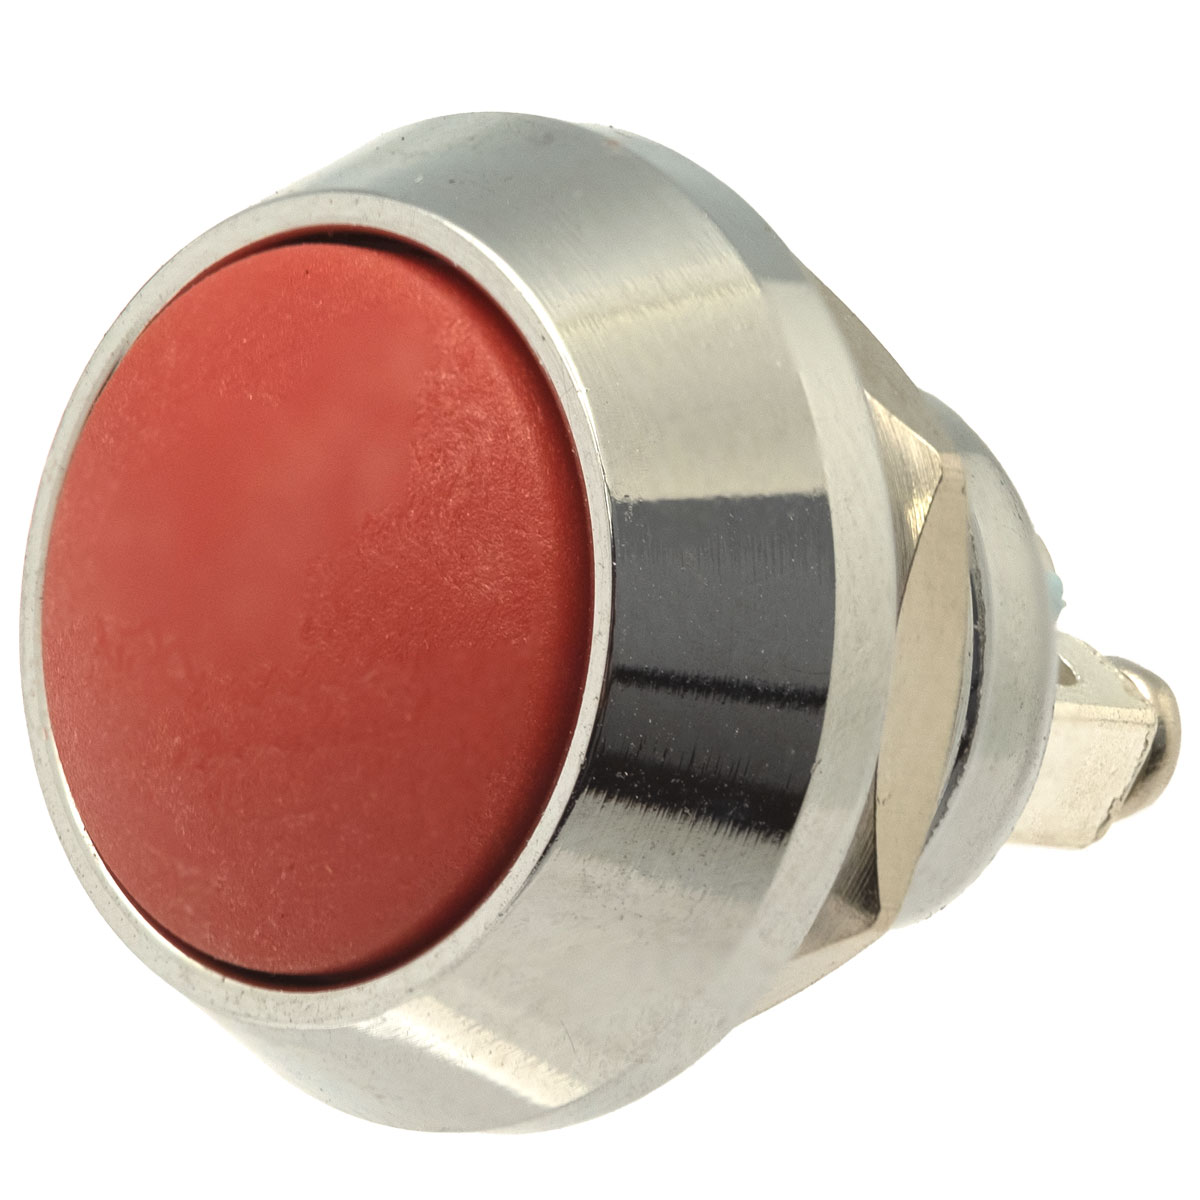 12mm. round, pushbutton, with 2 screw pin